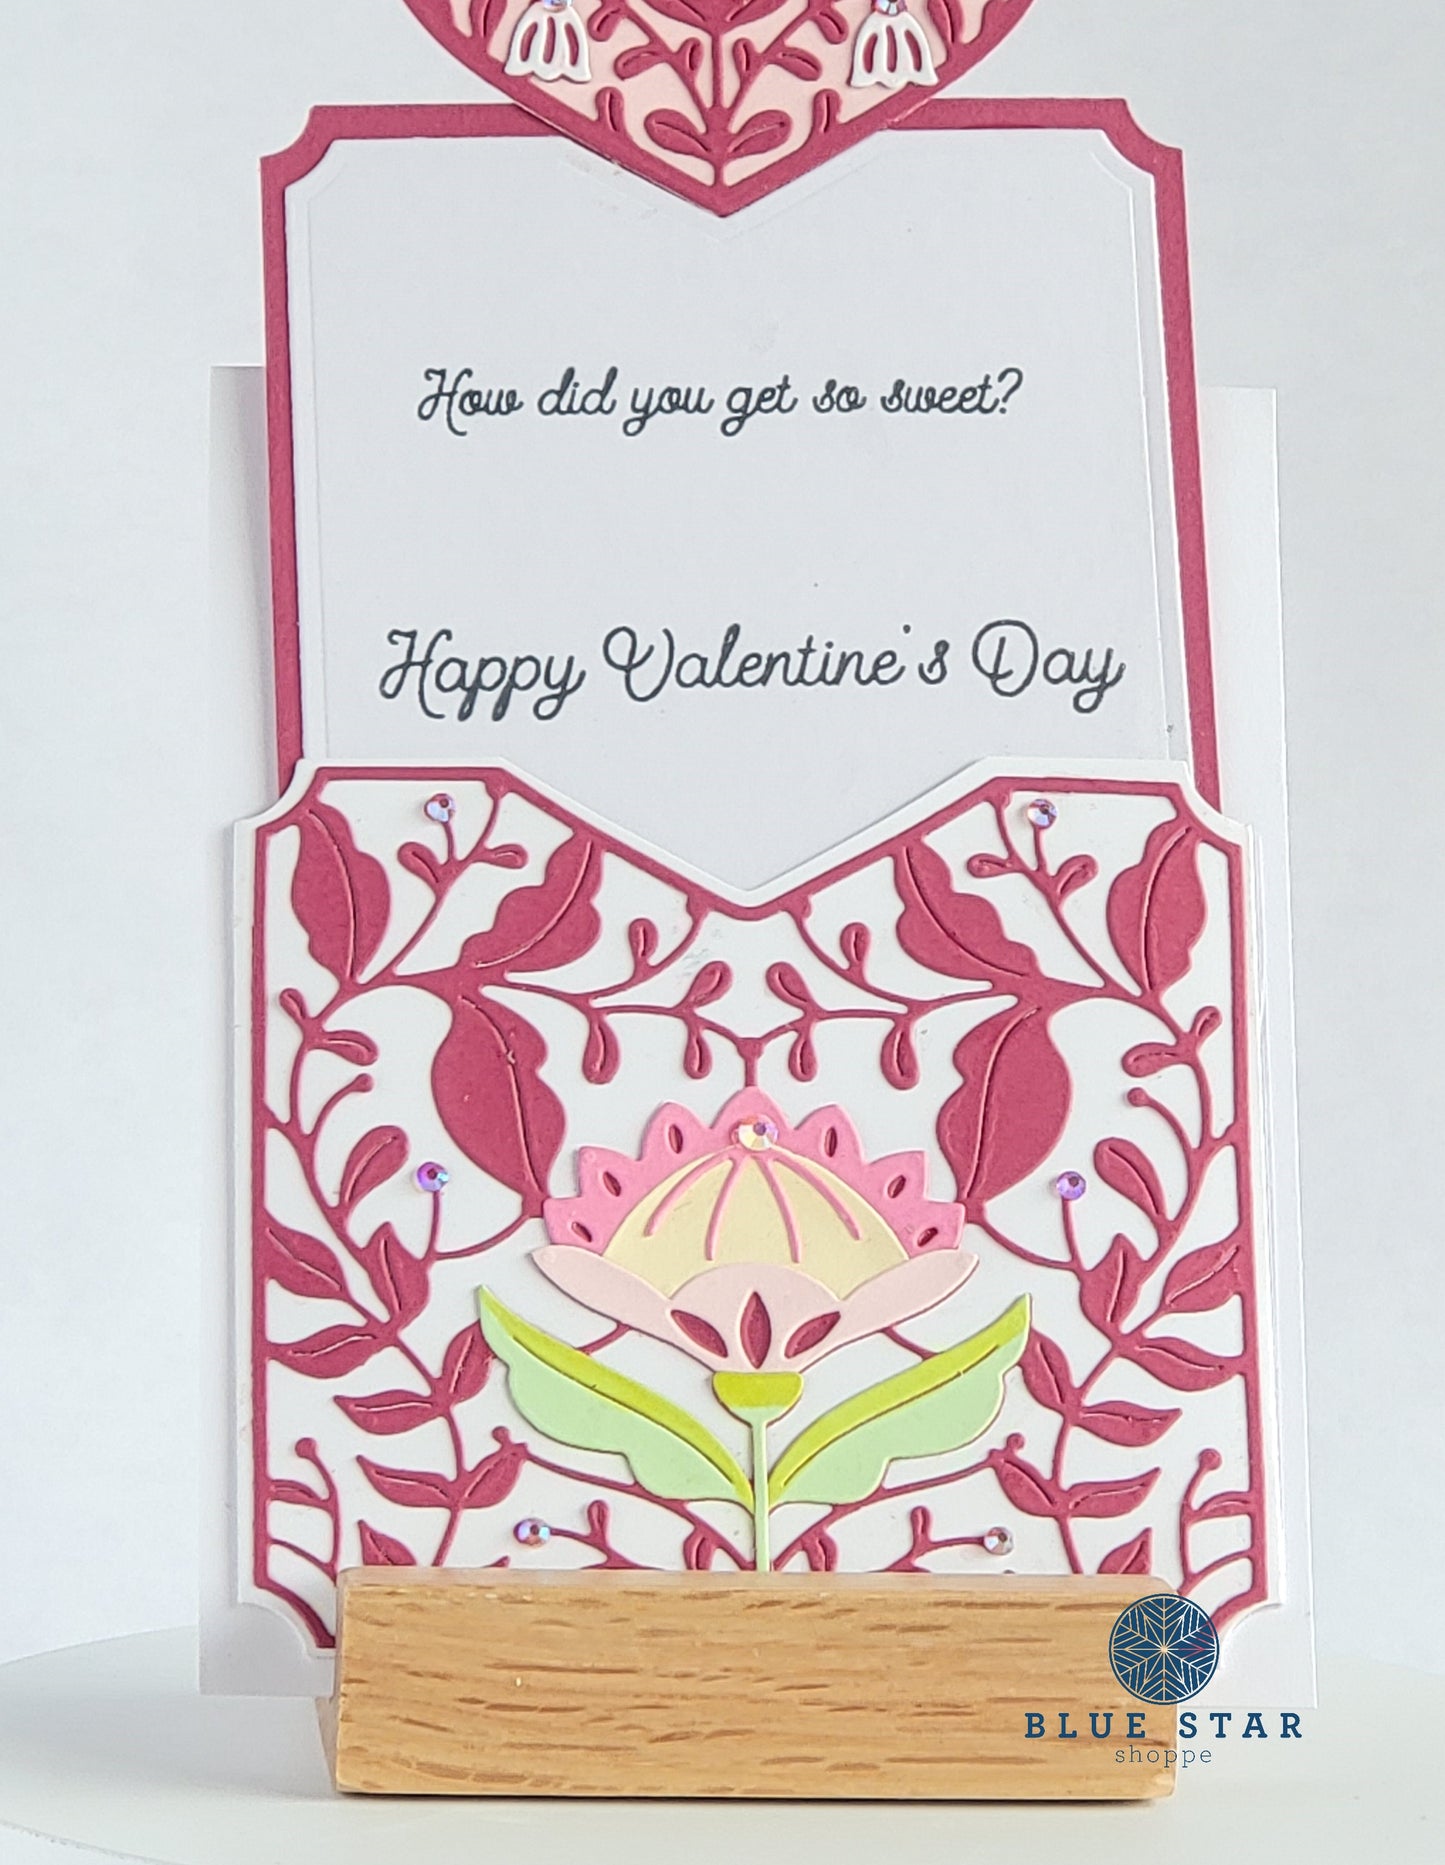 Happy Valentine's Day - So Sweet Greeting Card